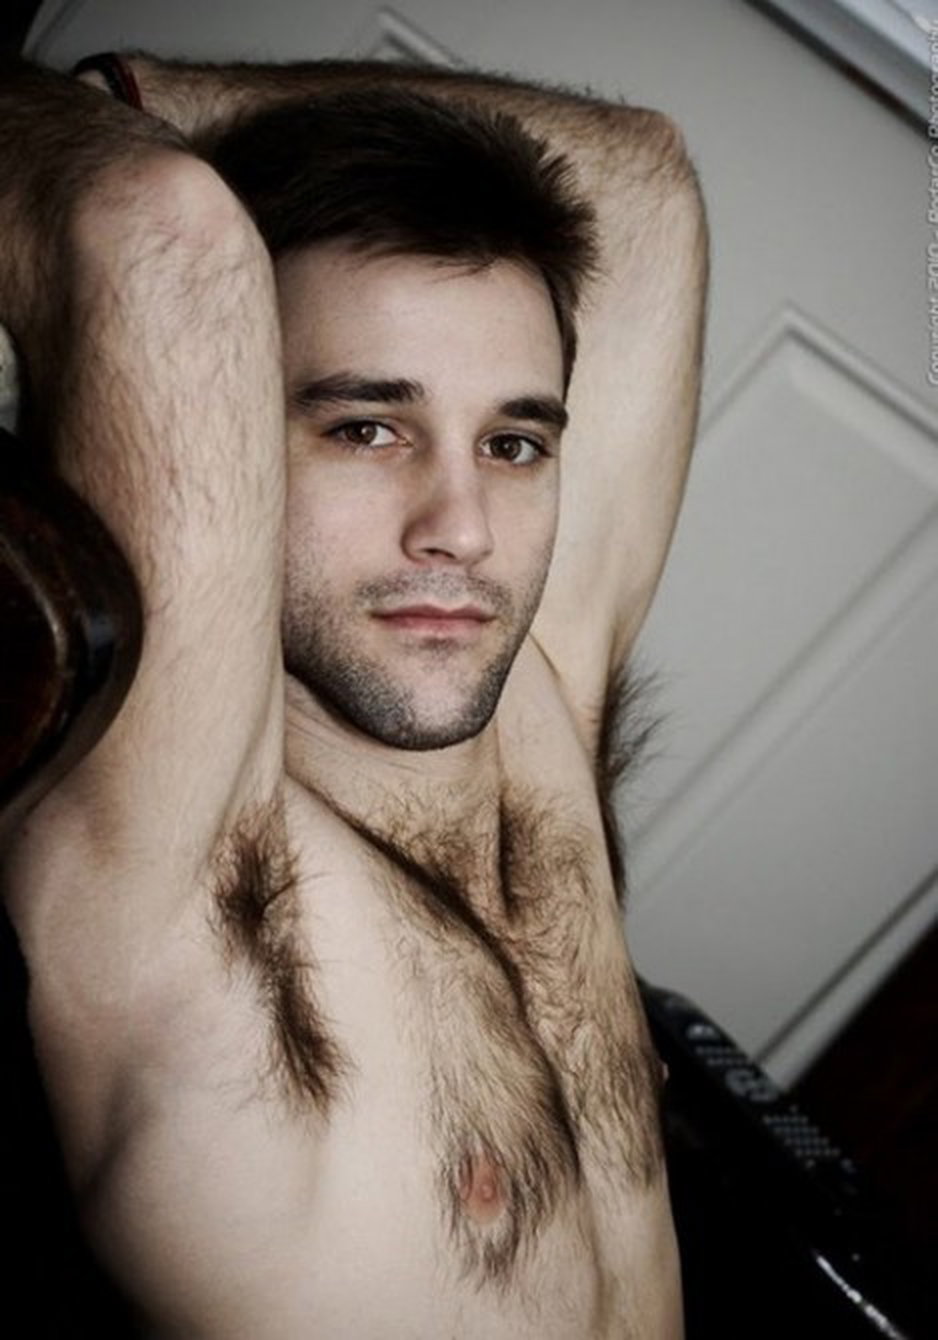 Watch the Photo by Smitty with the username @Resol702, posted on January 31, 2020. The post is about the topic Gay Hairy Armpits.